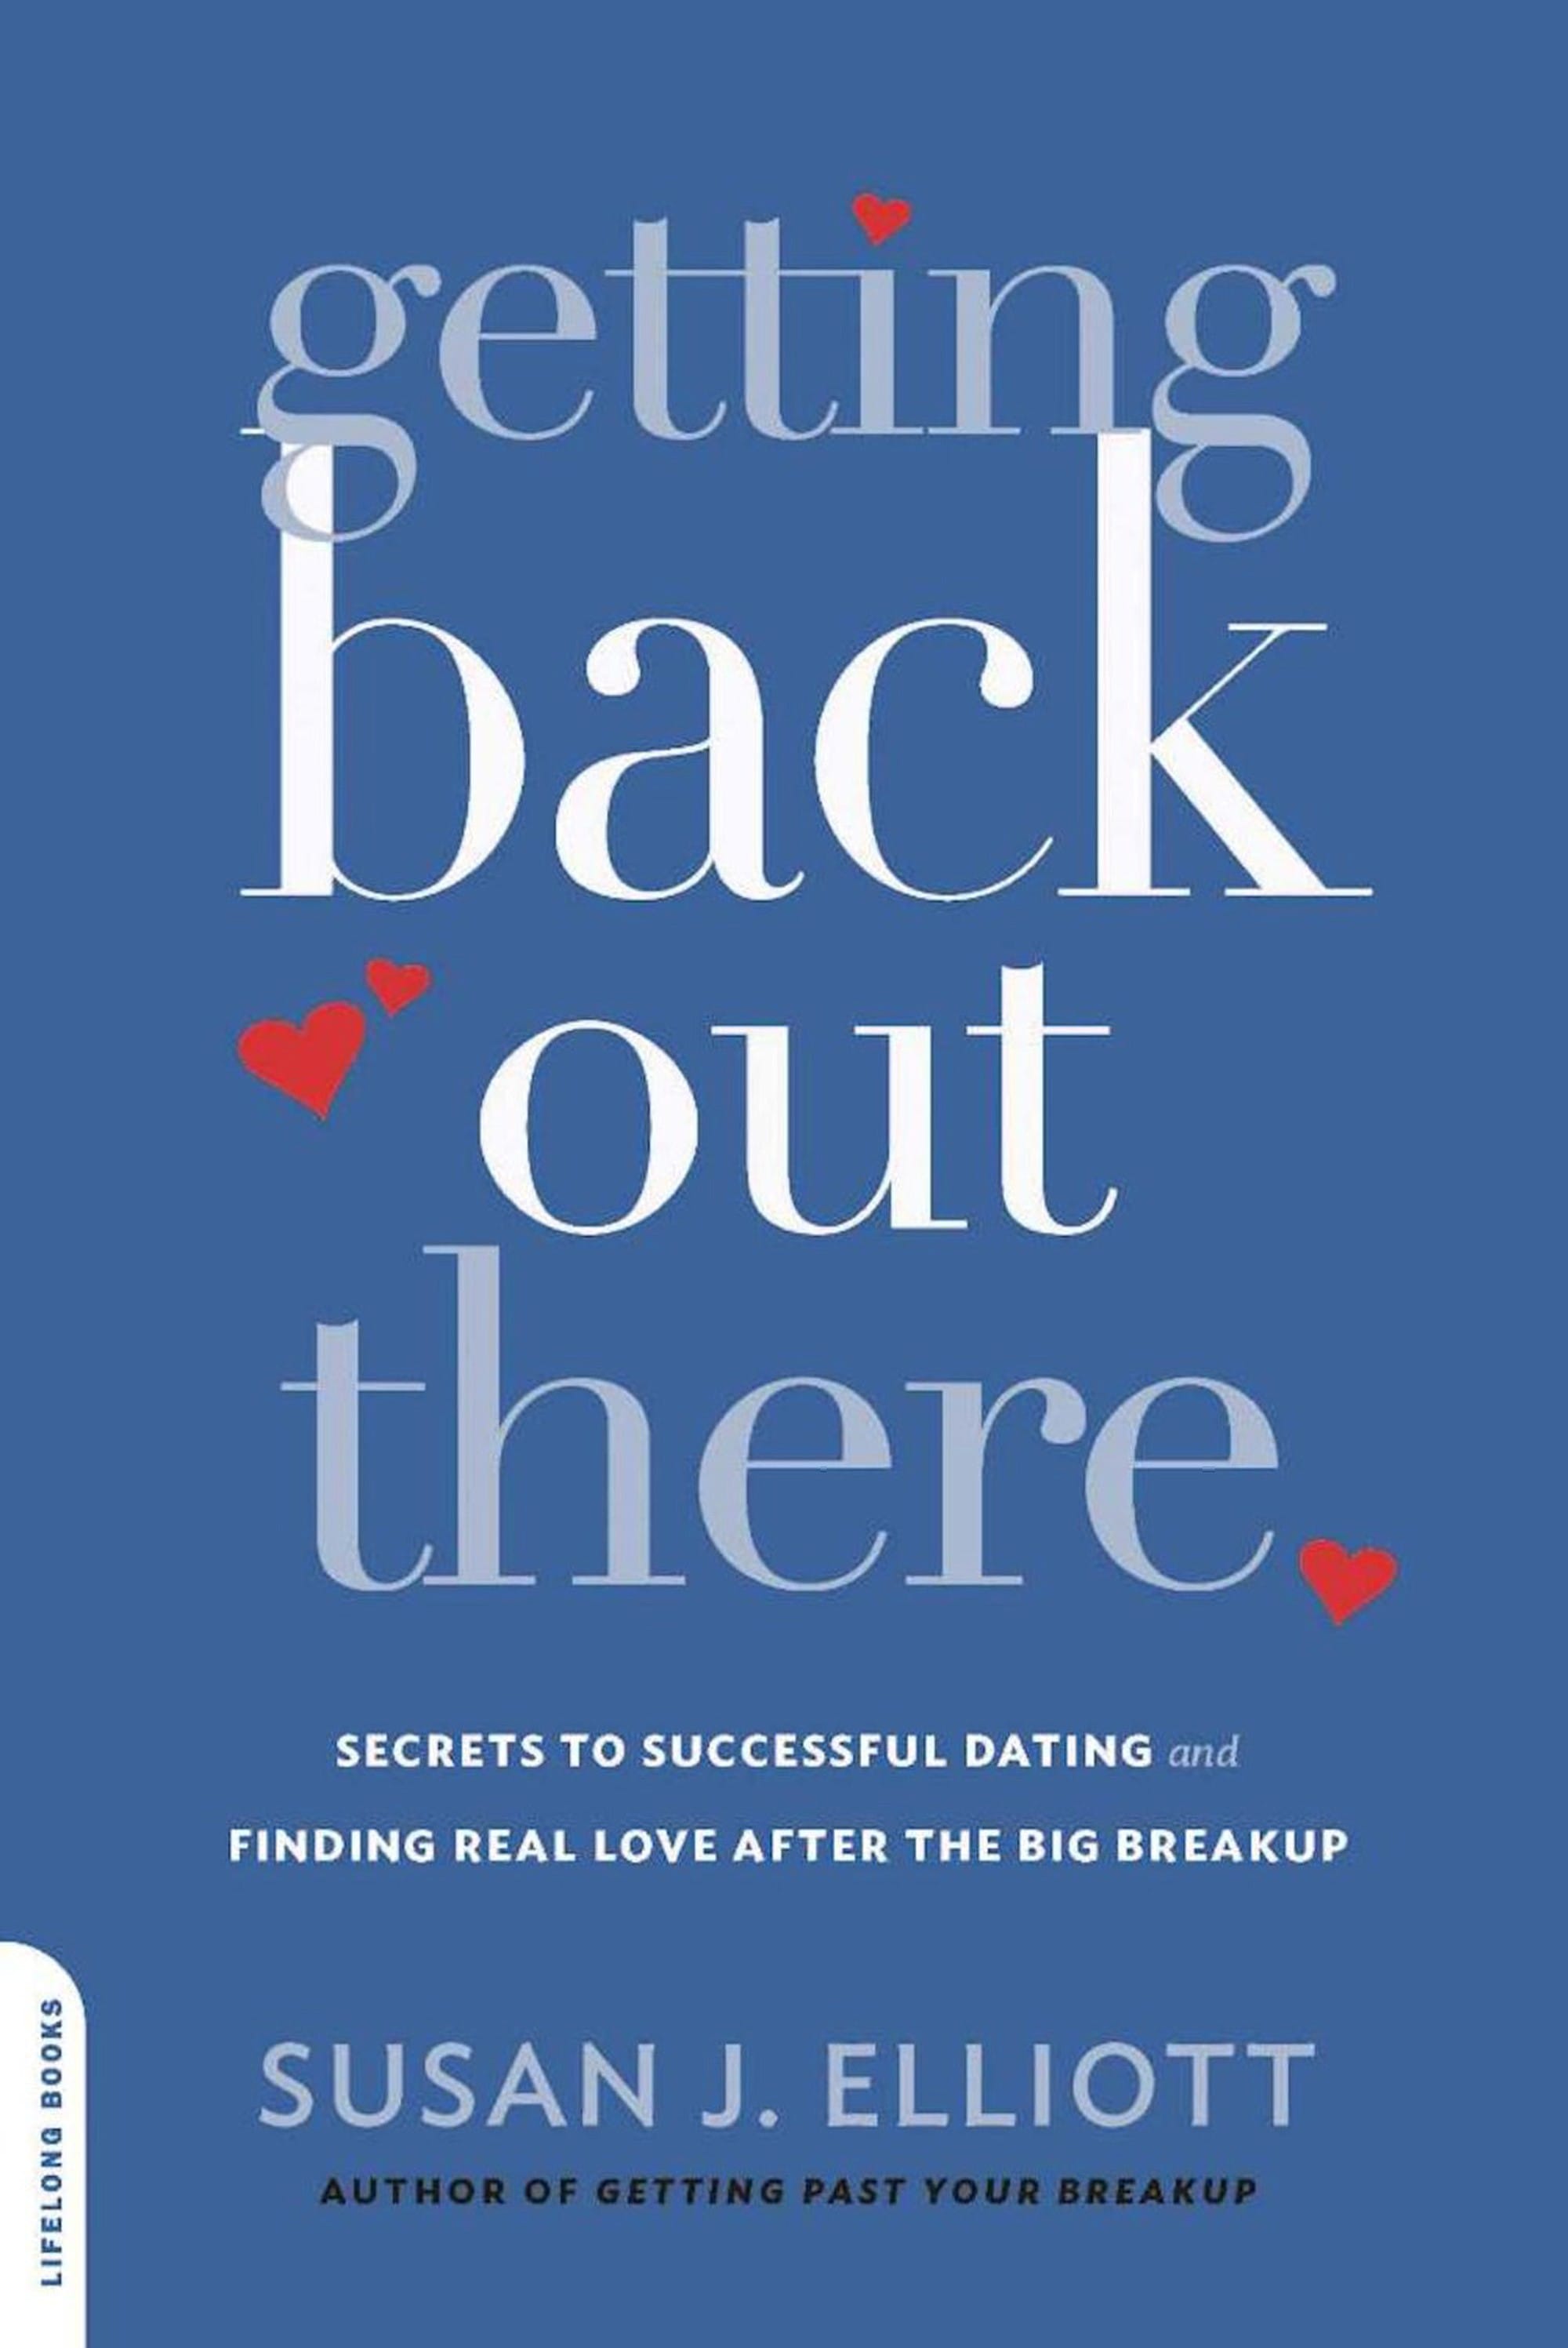 Amazon.com
&quot;Getting Back Out There: Secrets to Successful Dating and Finding Real Love After the Big Breakup&quot; by Susan Elliott.